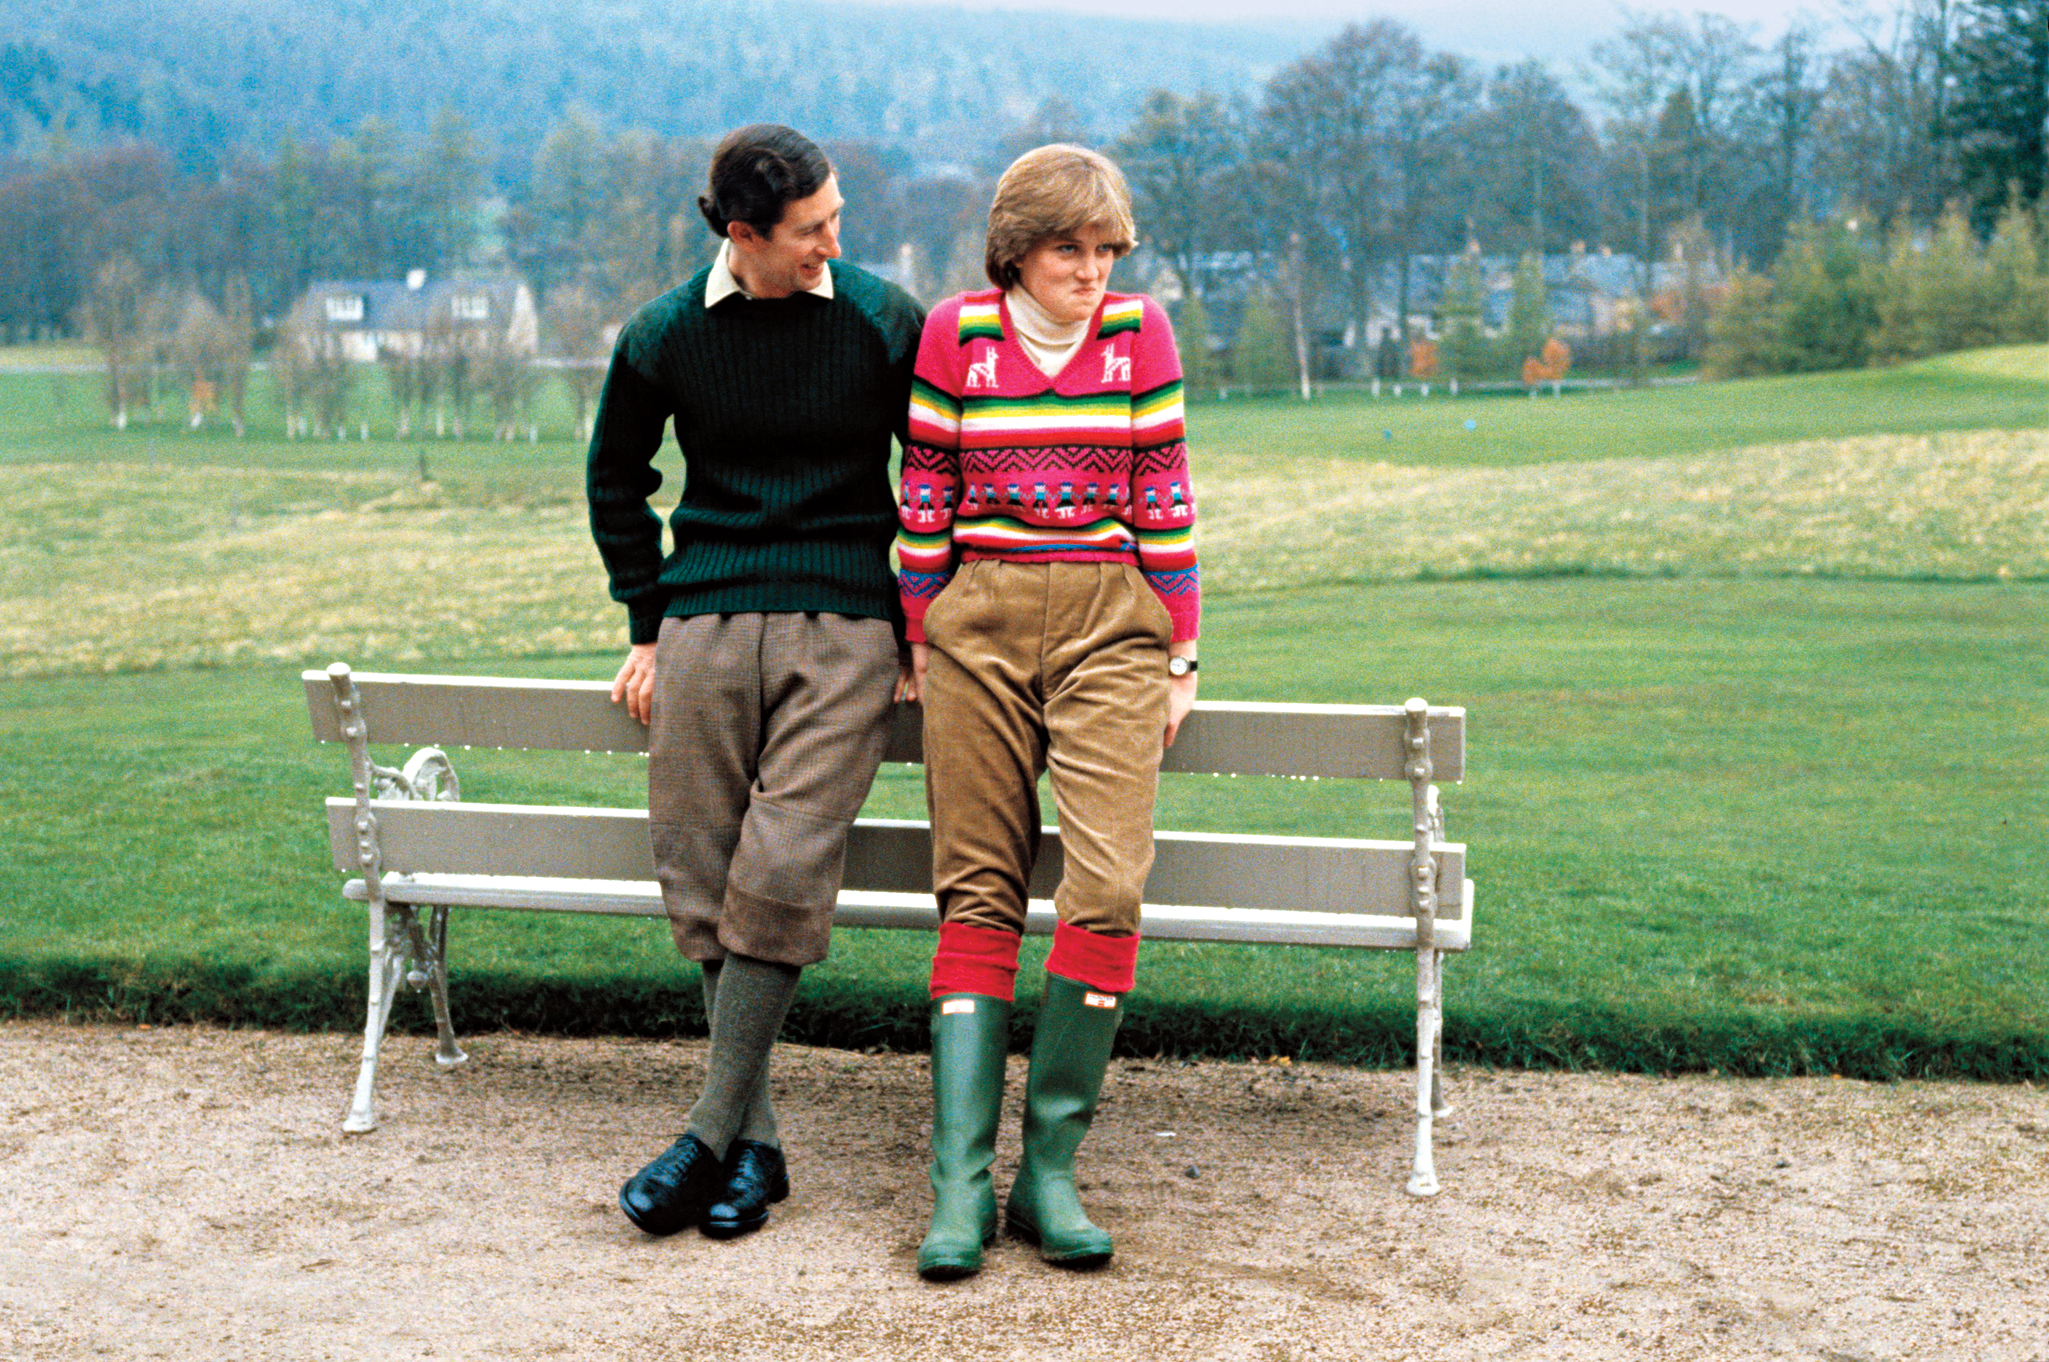 Prince Charles and Lady Diana Spencer, Scotland, Britain - May 1981